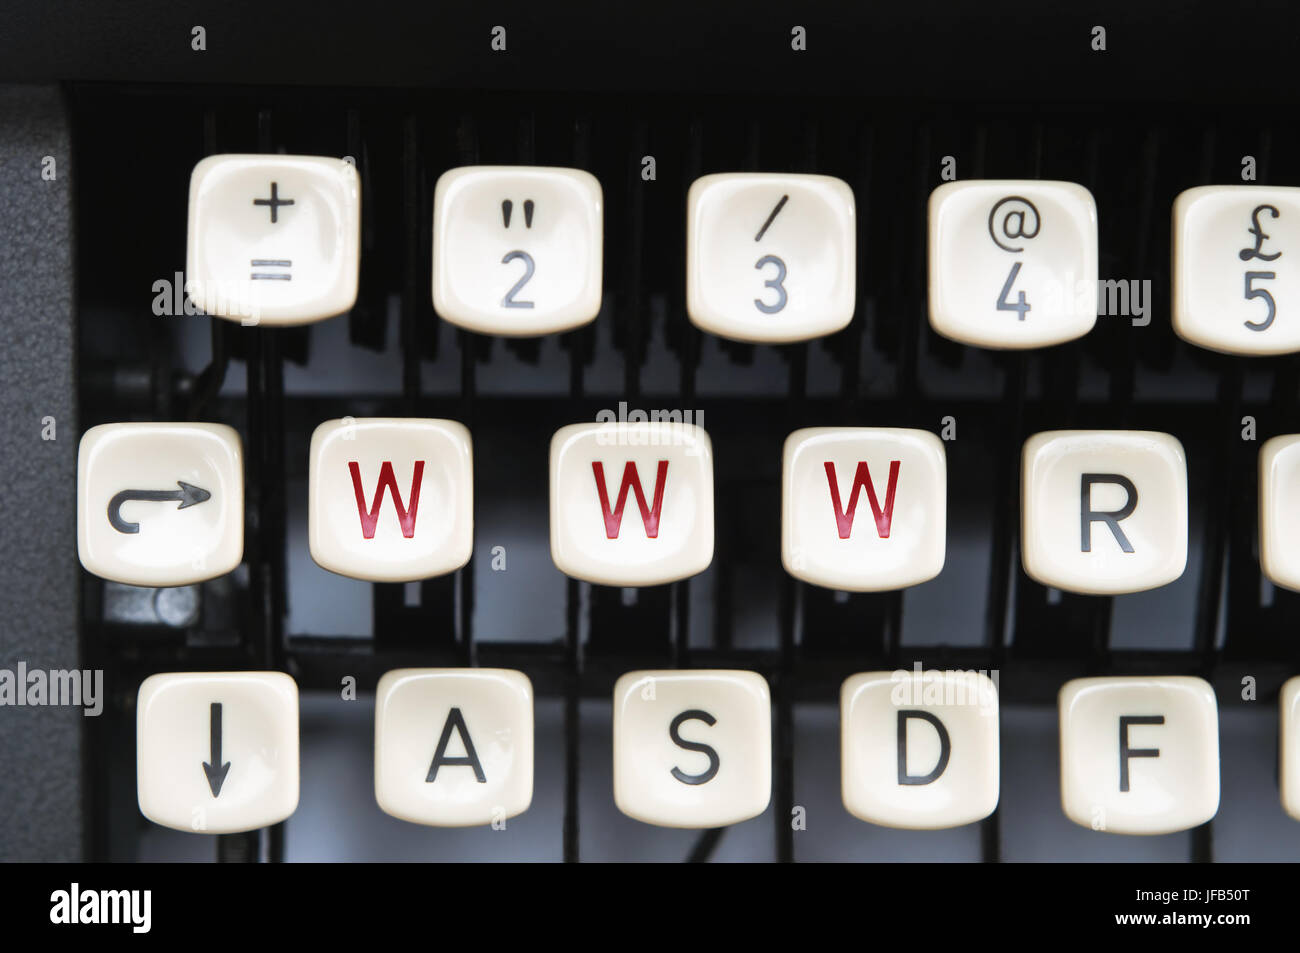 Close up of old manual typewriter keys with three displaying WWW in red to illustrate old technology meets new, Web authoring, blogging etc. Stock Photo